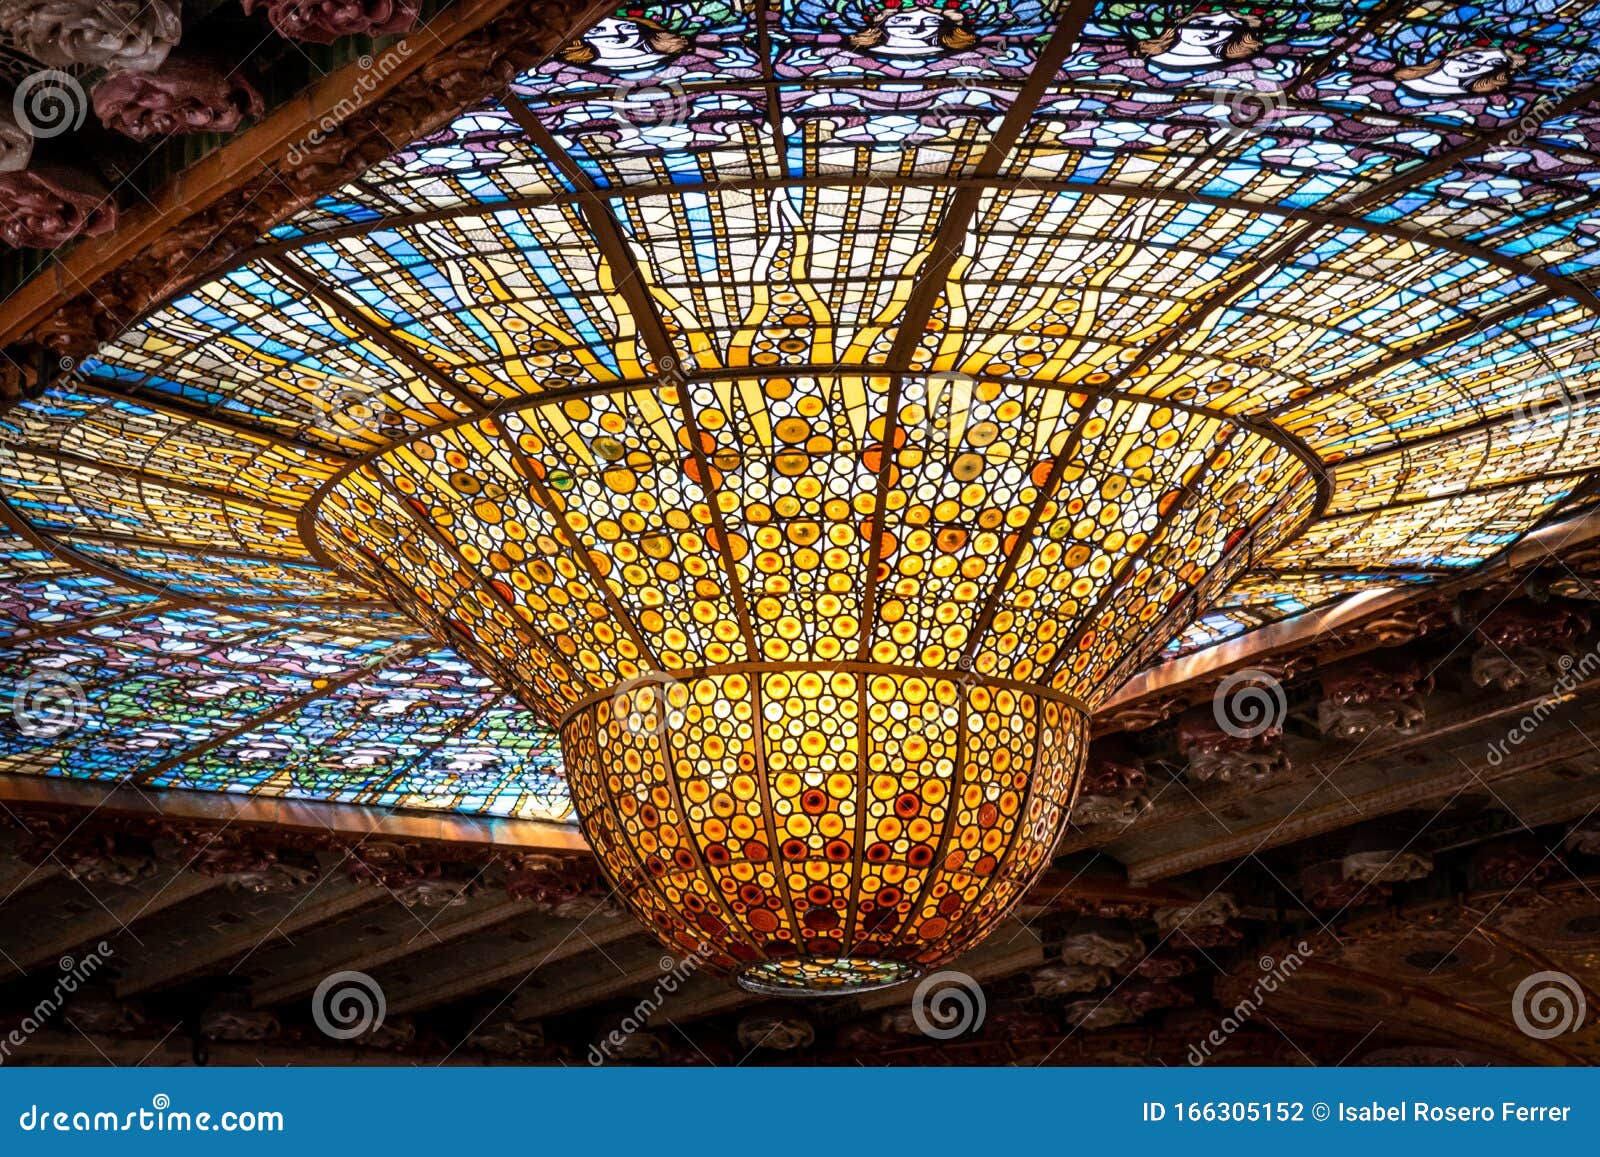 stained-glass inverted dome of the palau de la musica catalana, concert hall by lluis domenech i montaner. barcelona, catalonia.